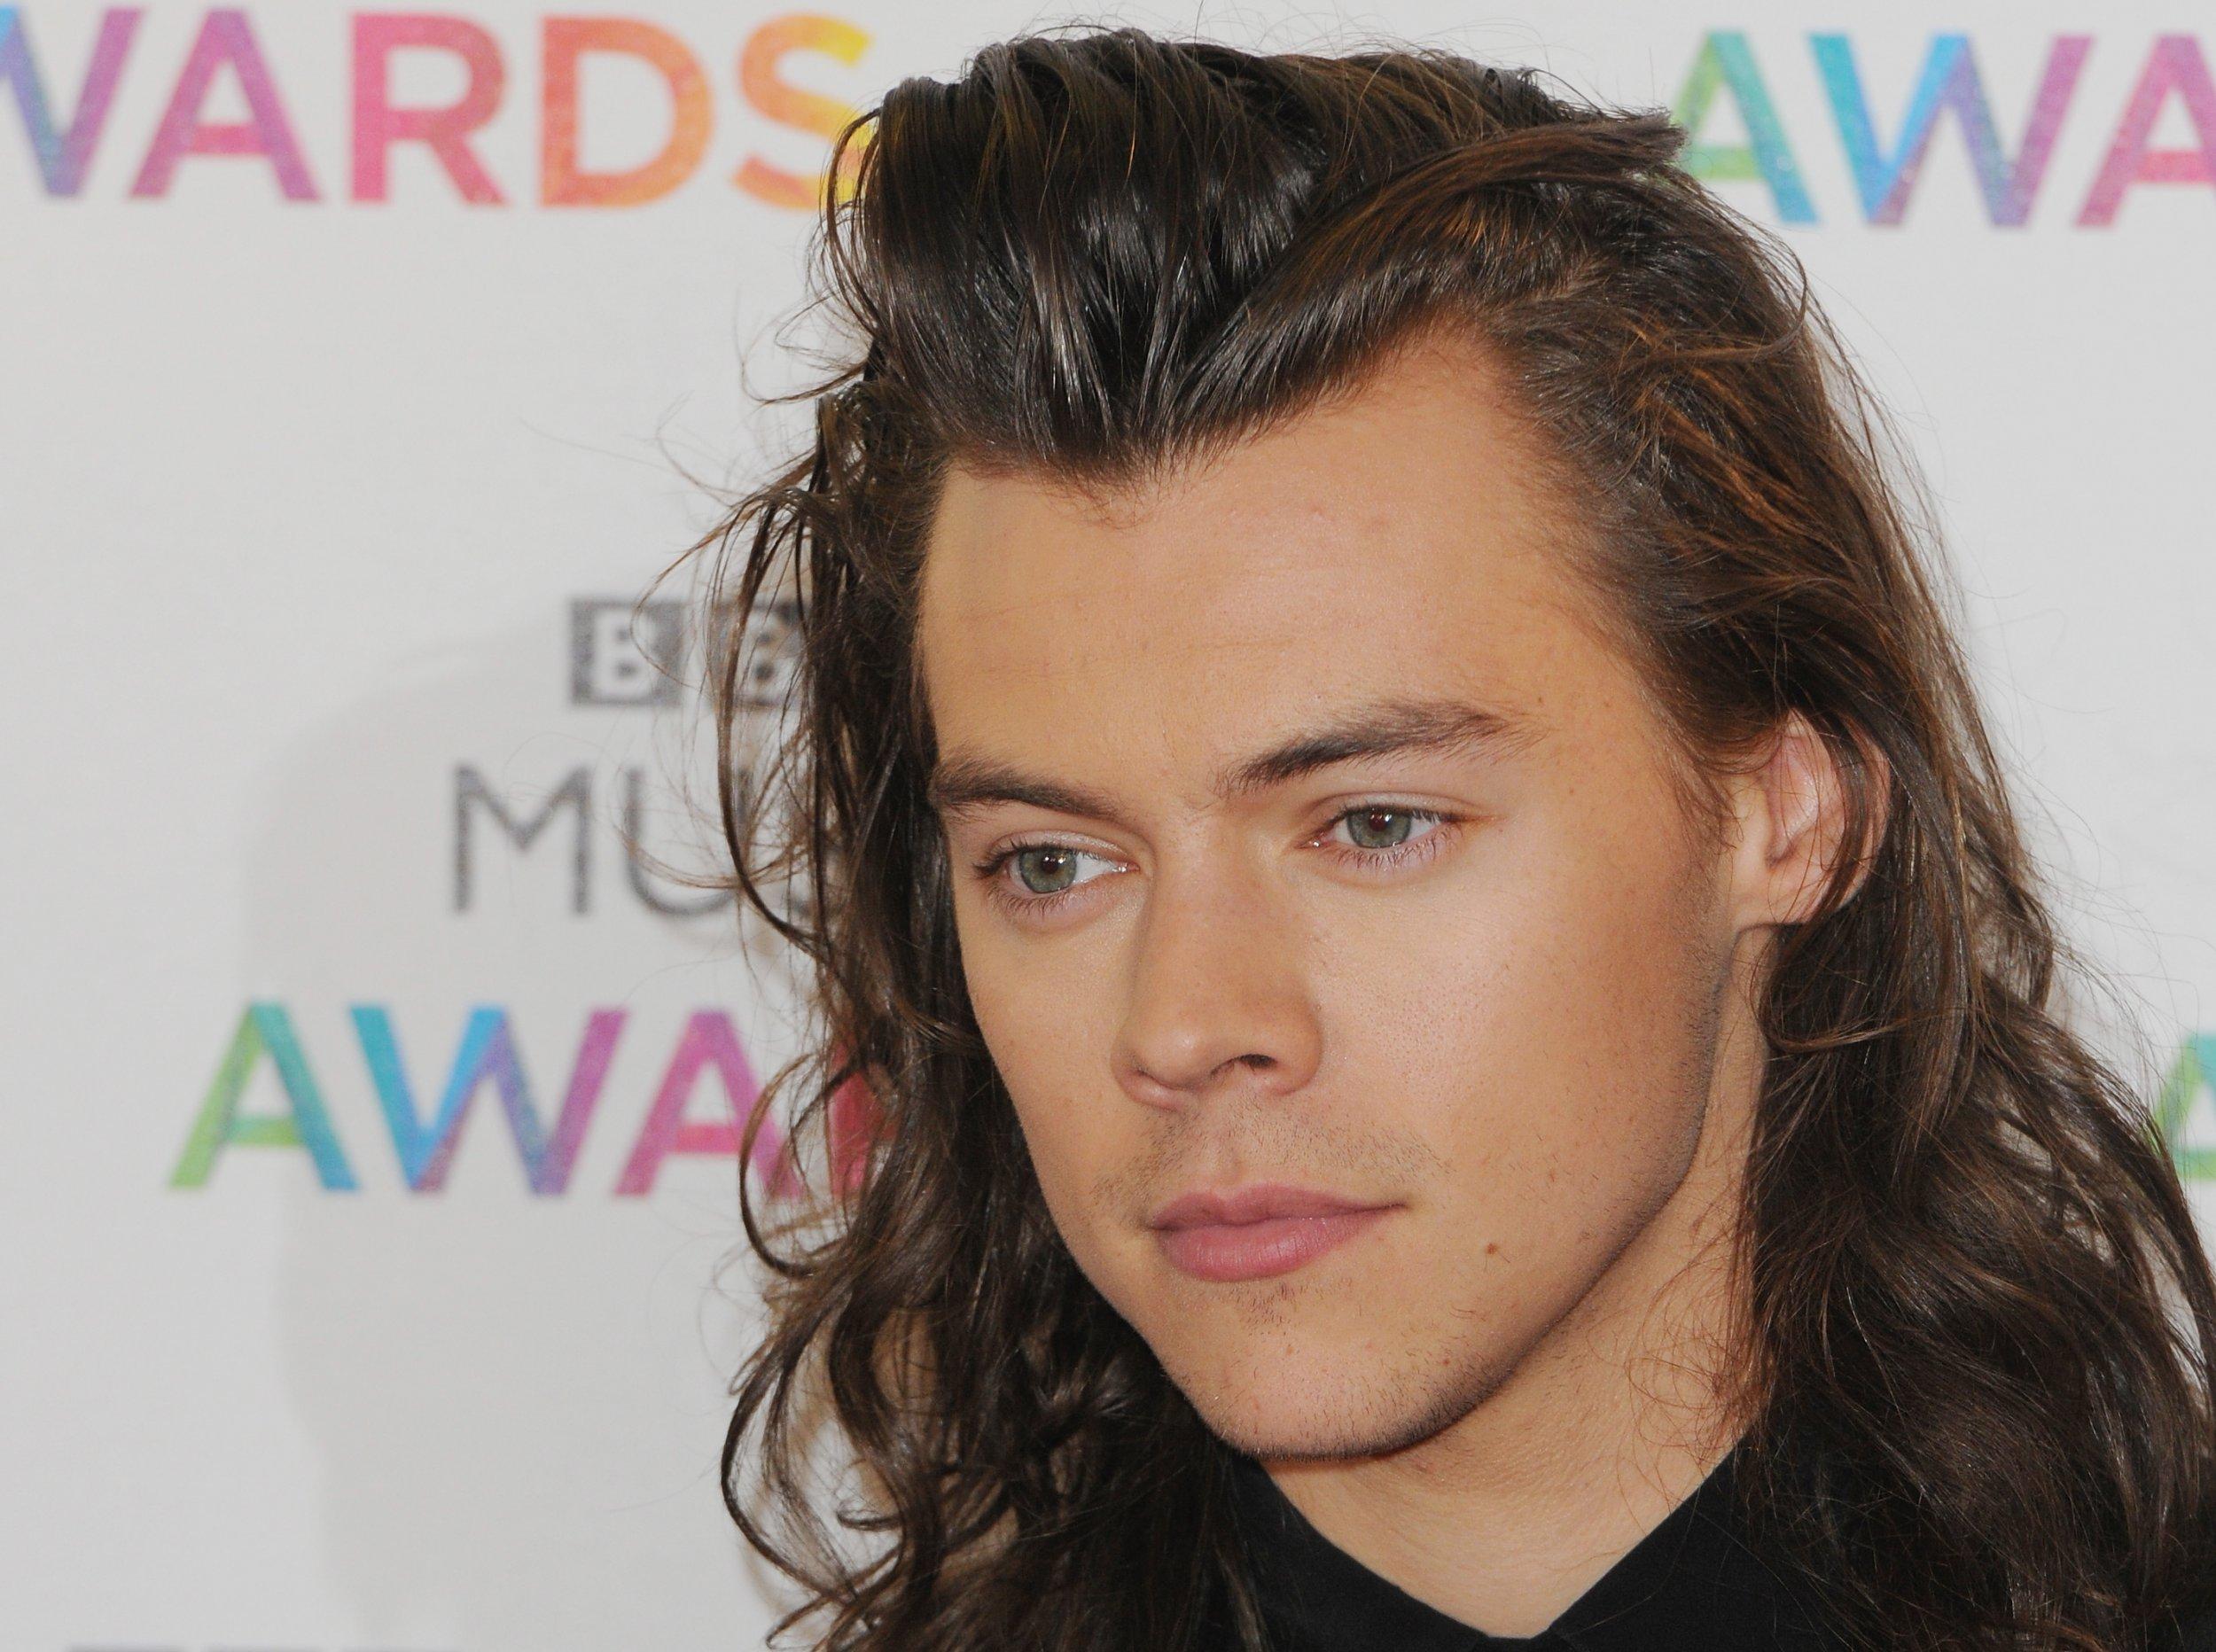 Twitter Reacts to Harry Styles Declining Role As Prince Eric